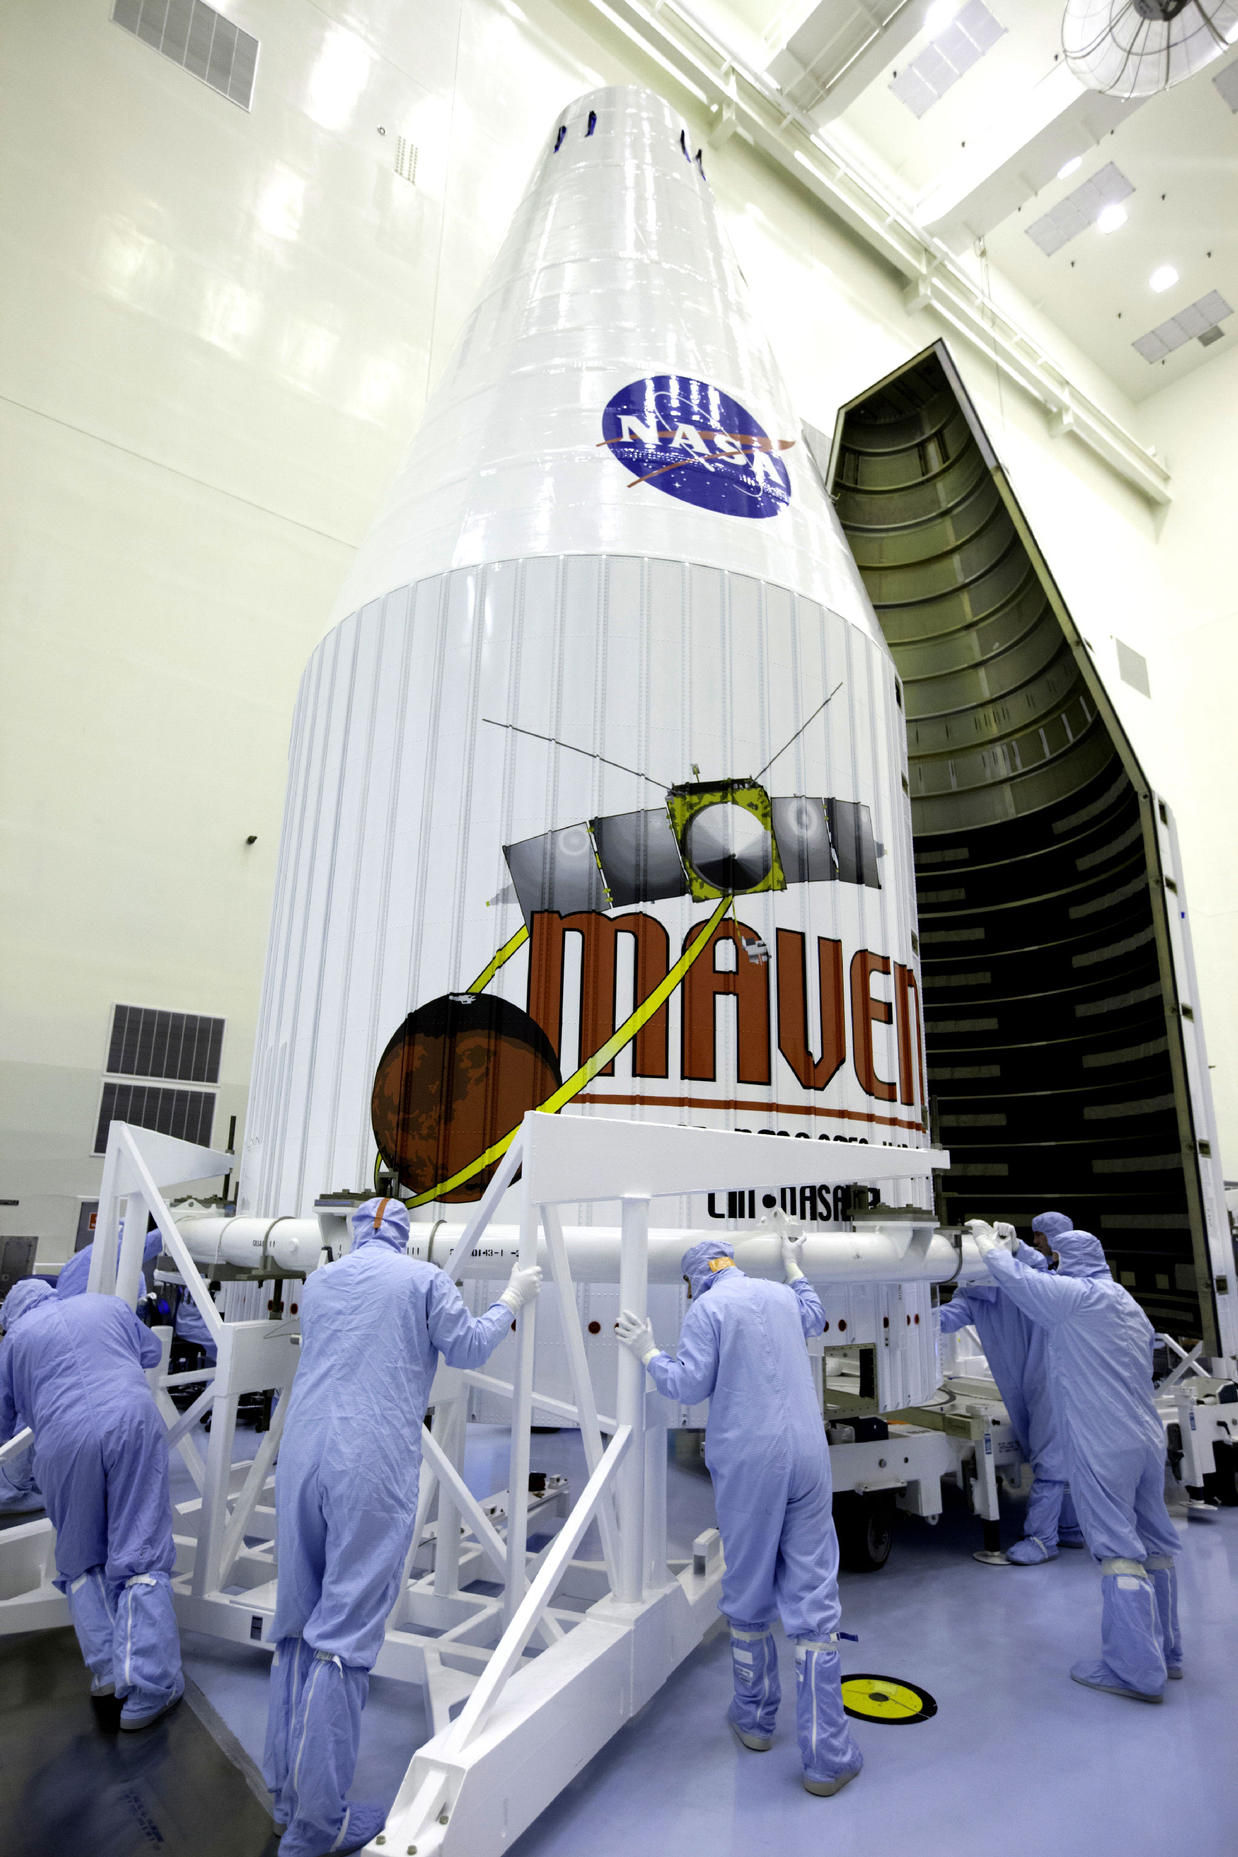 The payload fairing for the Mars Atmosphere and Volatile Evolution, or MAVEN, spacecraft arrives at the Payload Hazardous Servicing Facility at NASA's Kennedy Space Center in Florida.